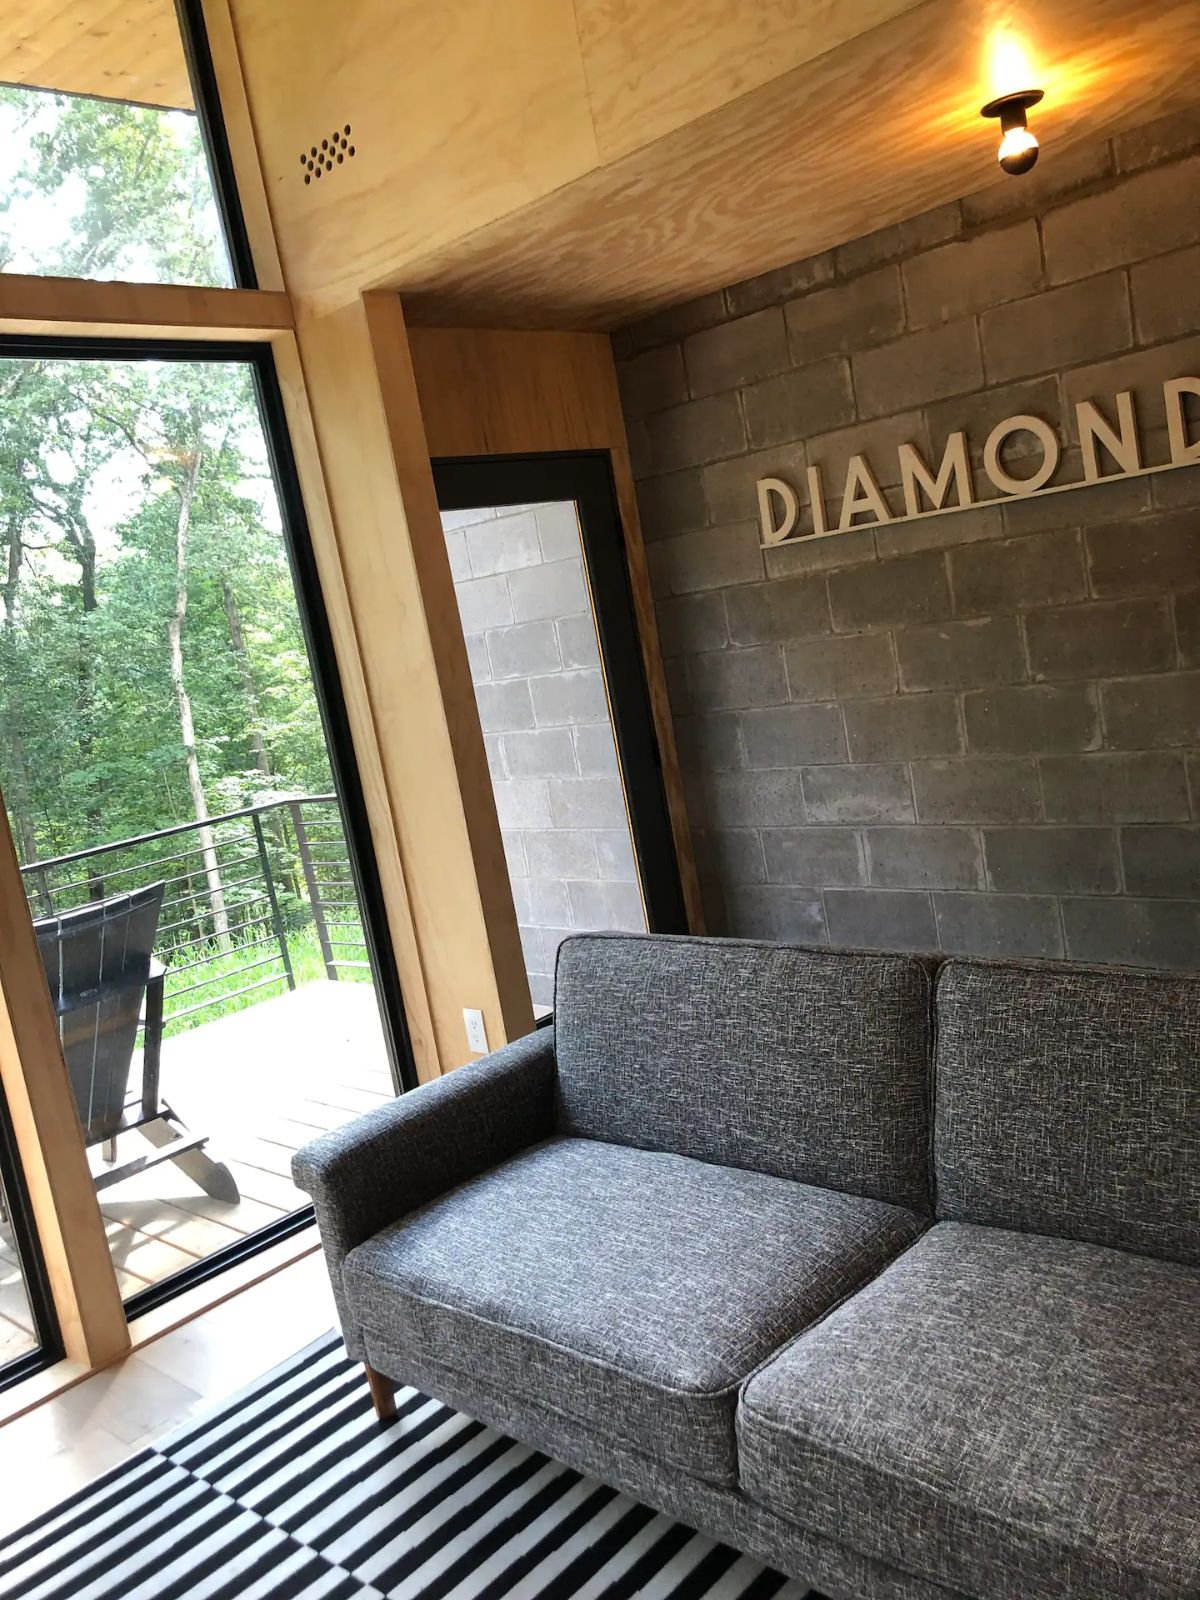 gray sofa against brick wall with diamond sign above